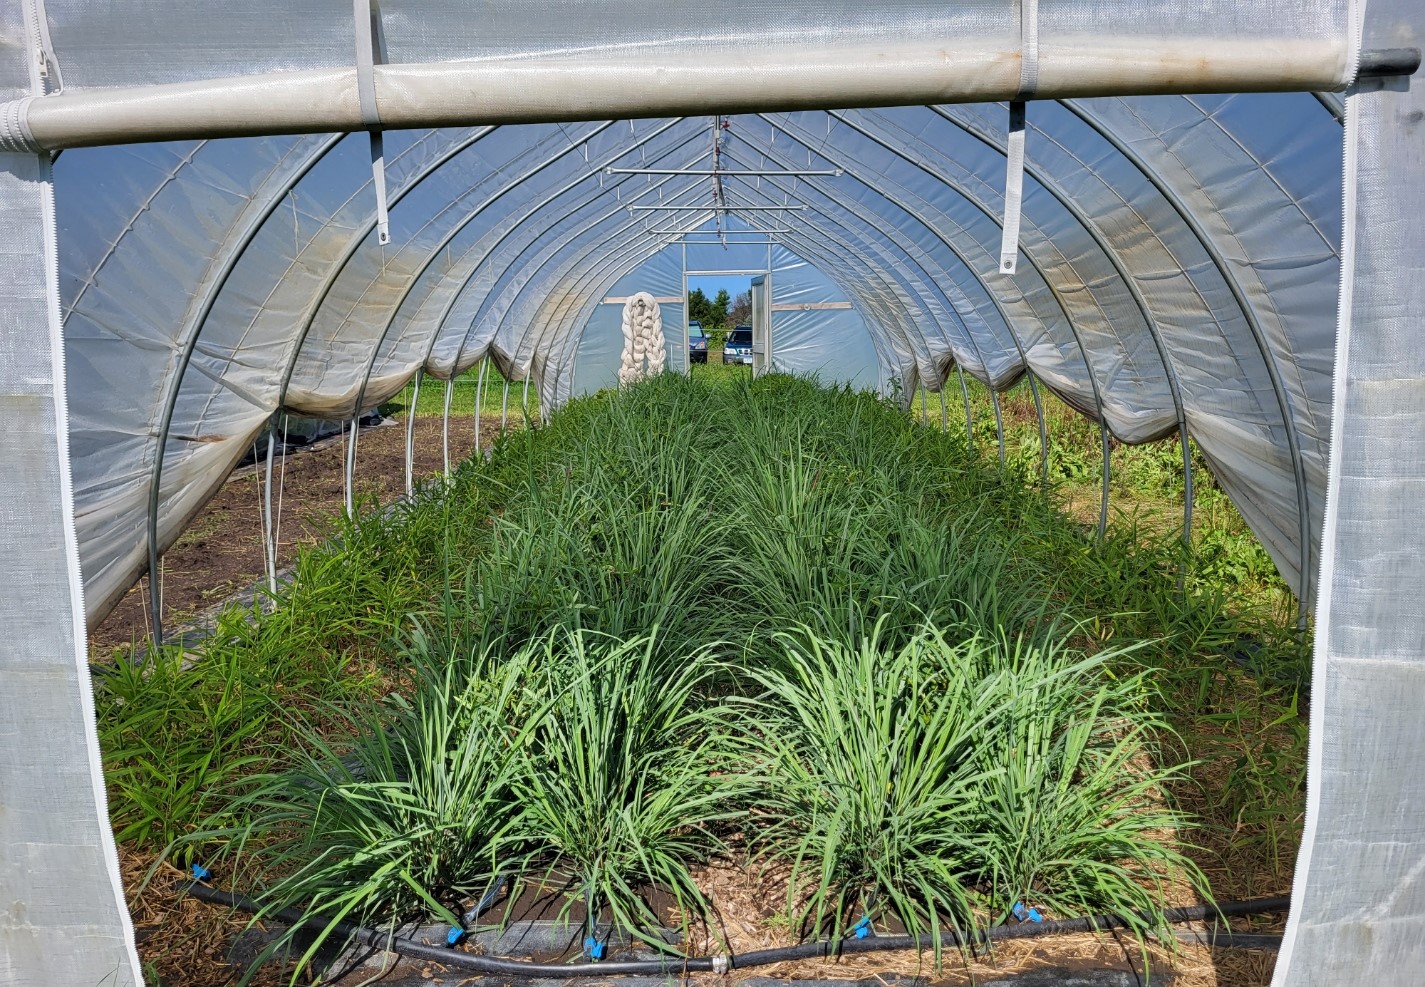 Lemongrass and ginger being grown in a hoophouse.